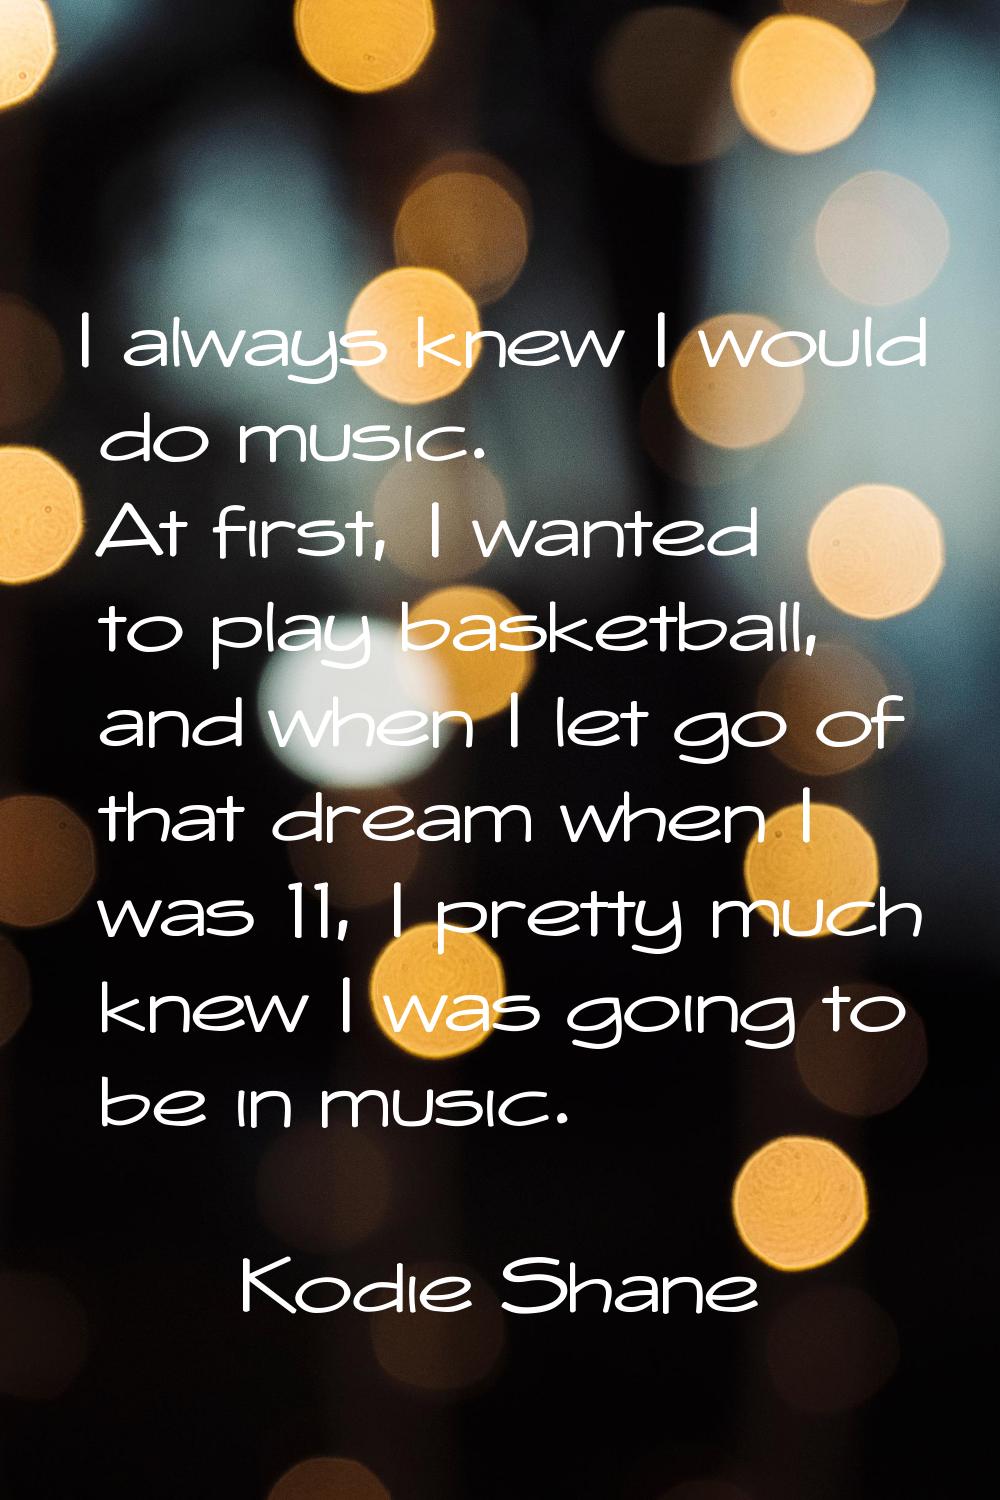 I always knew I would do music. At first, I wanted to play basketball, and when I let go of that dr